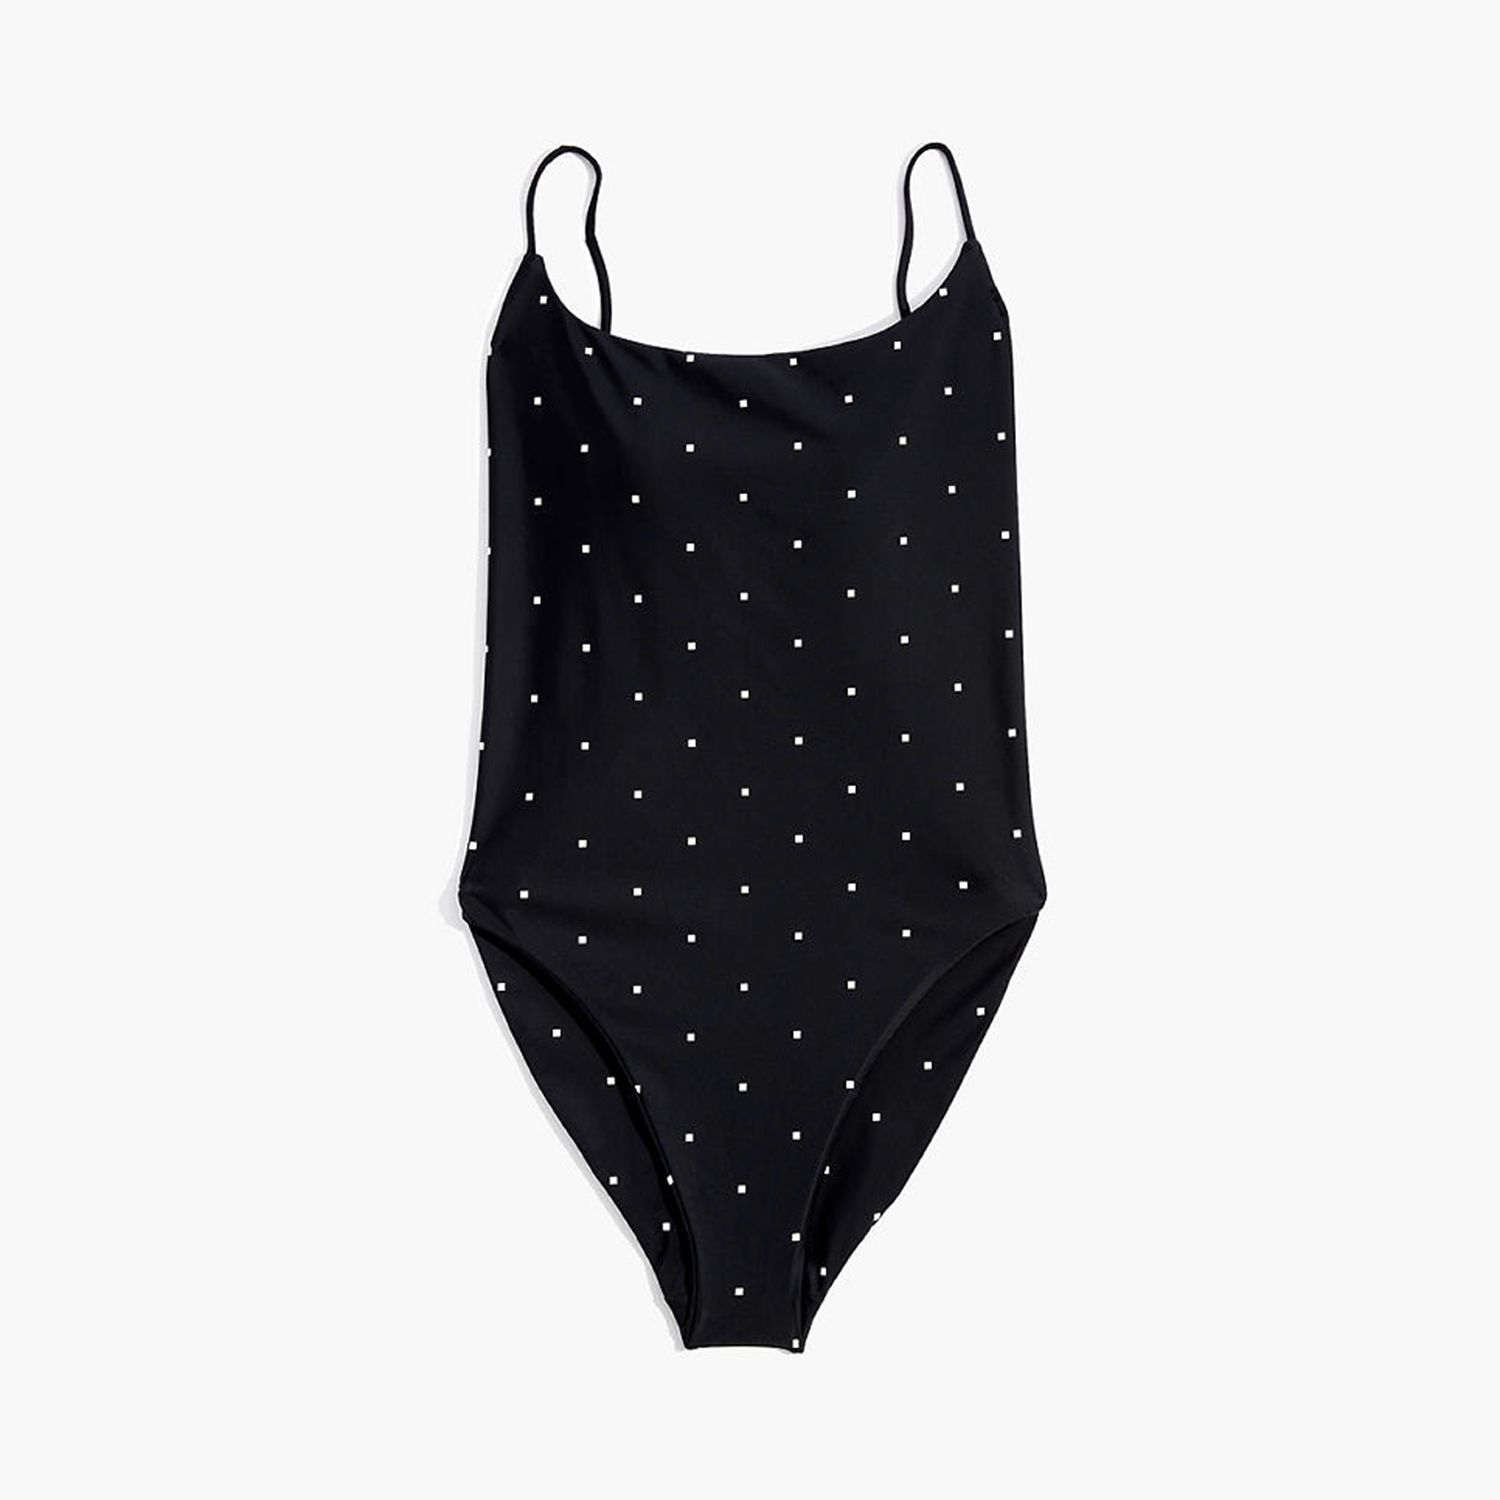 Madewell Second Wave Spaghetti-Strap One-Piece Swimsuit in Square Spots